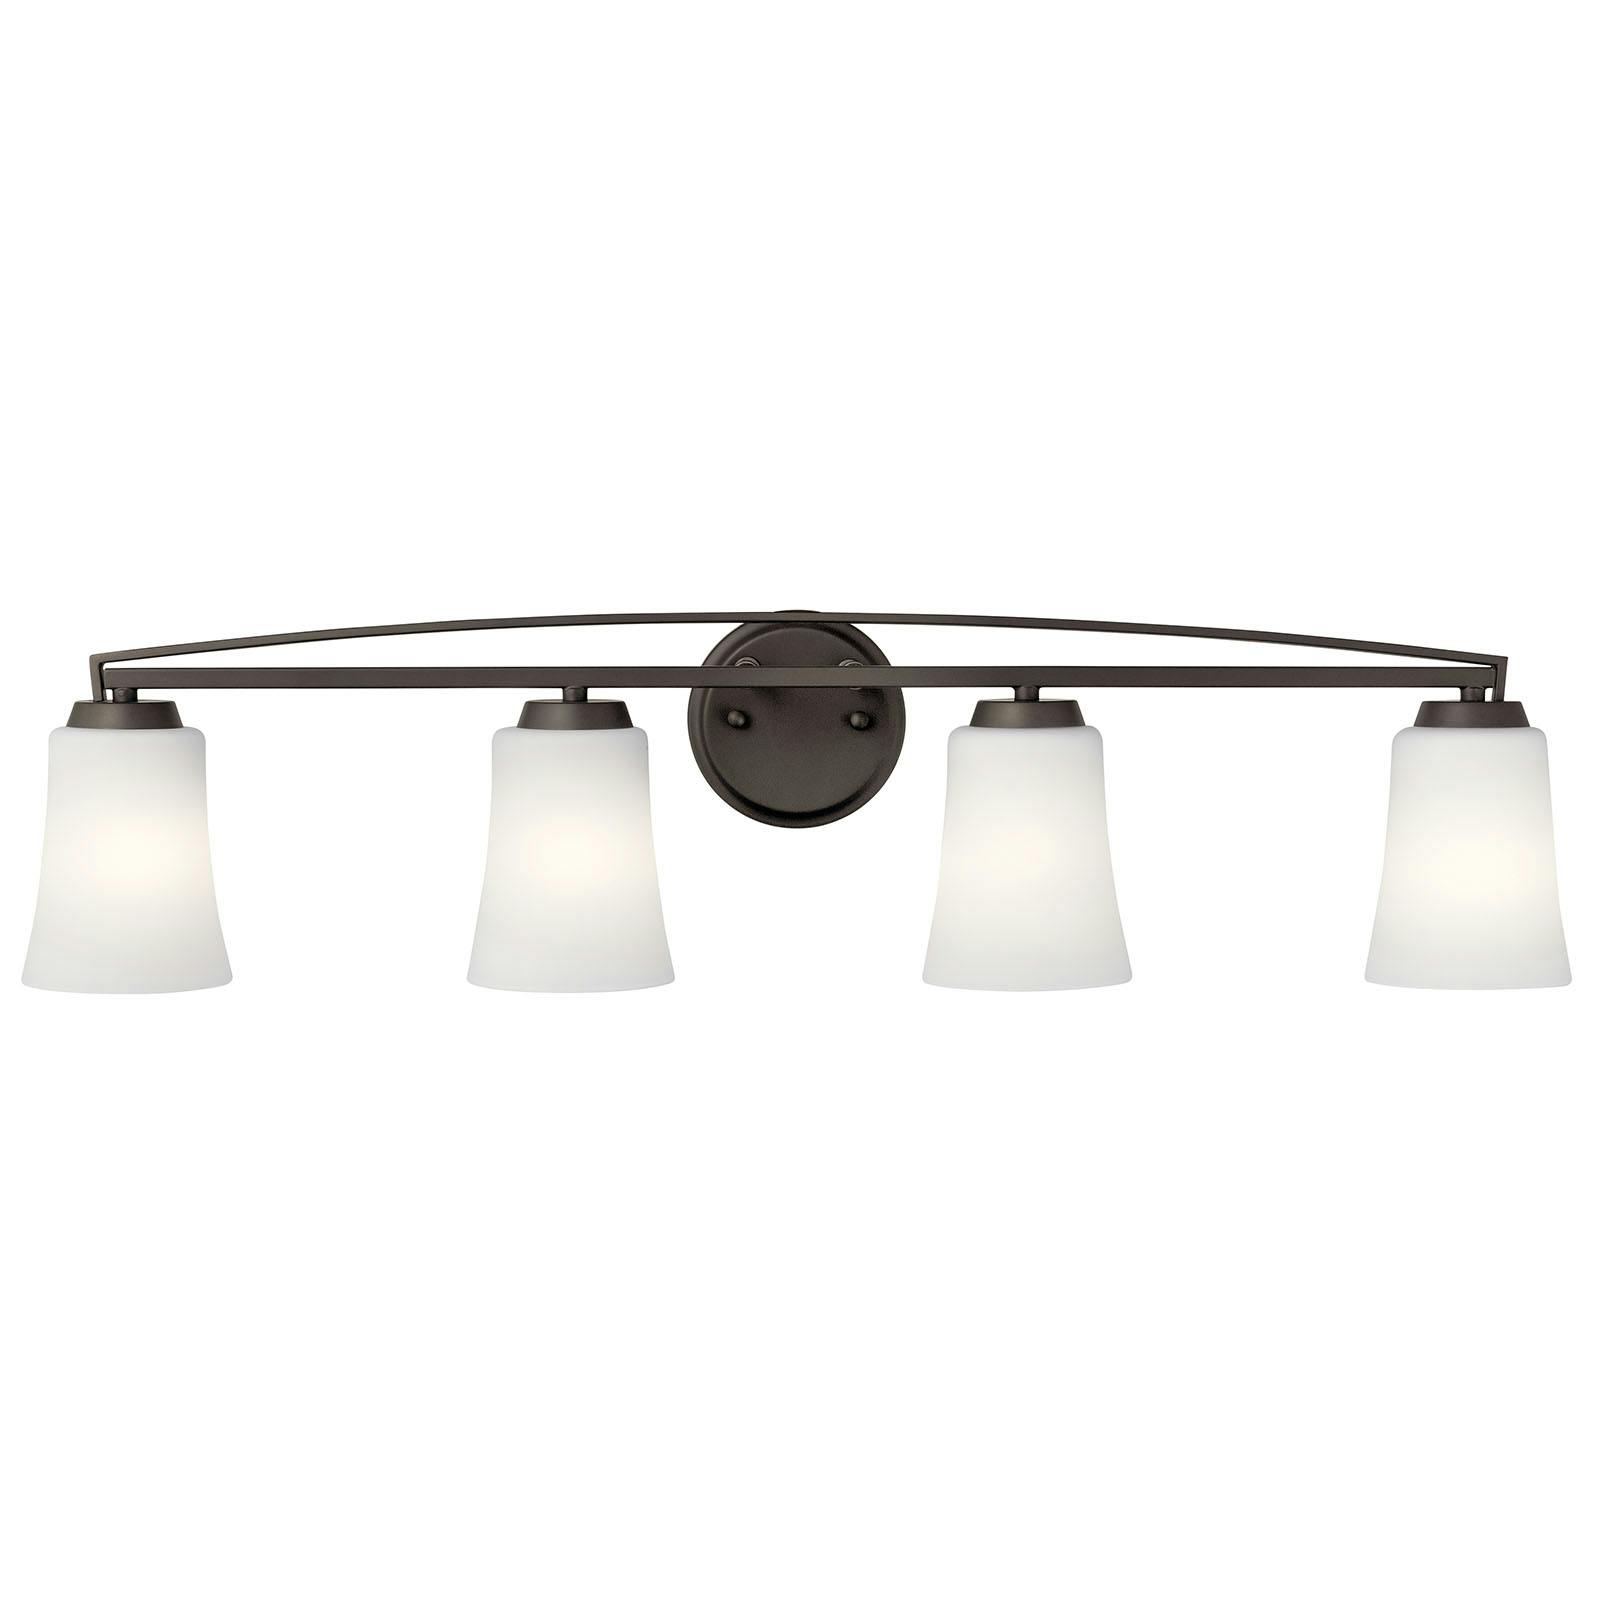 The Tao 4 Light Vanity Light Olde Bronze® facing down on a white background